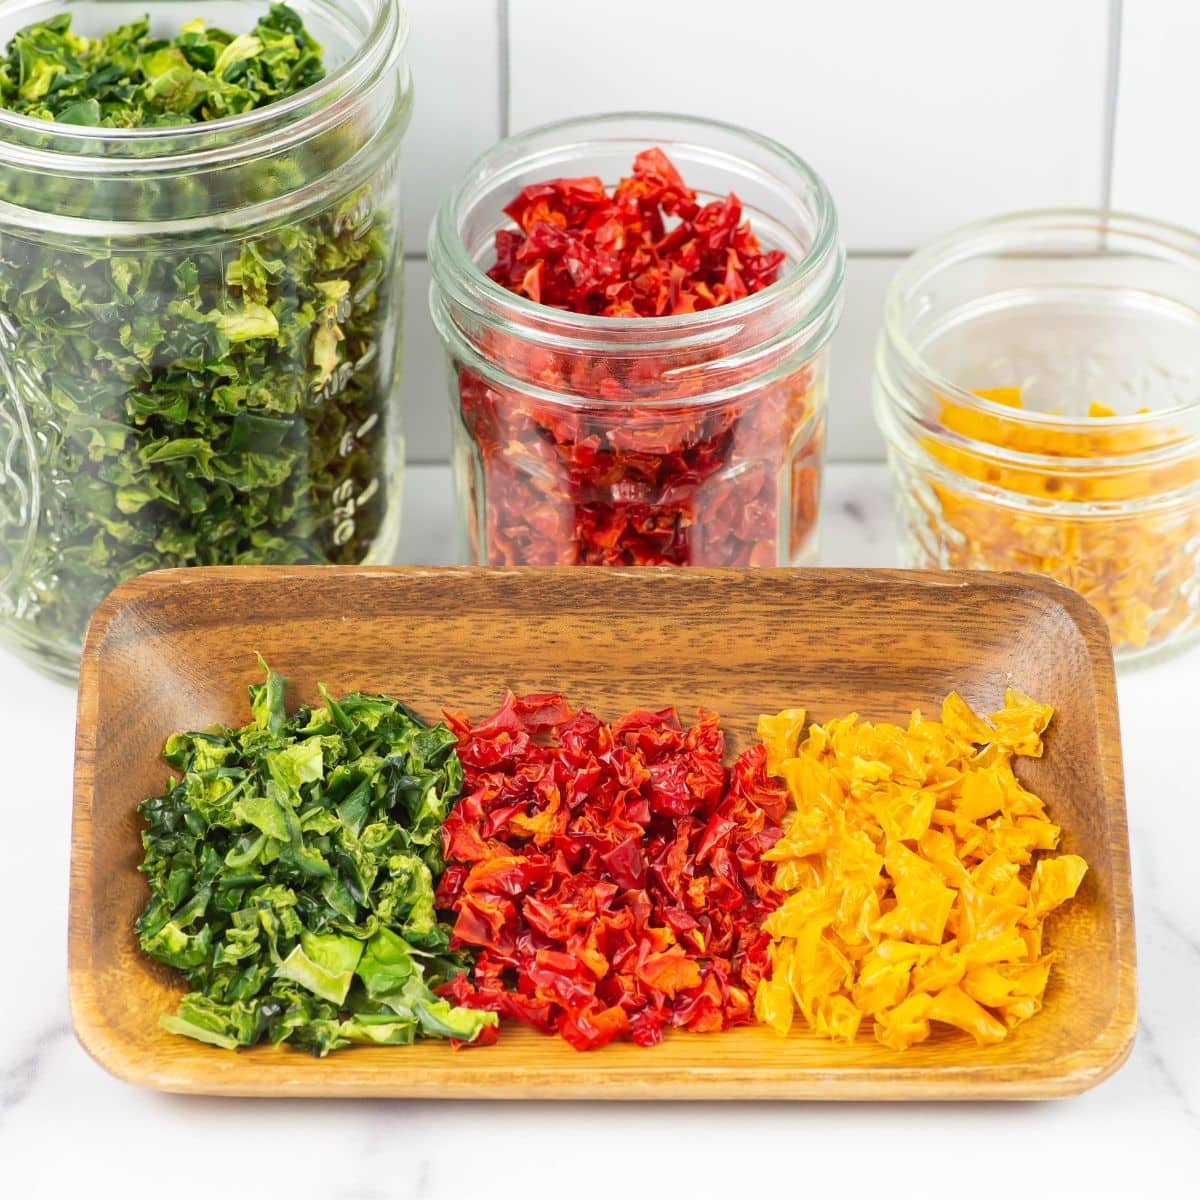 Green, red, and yellow dehydrated bell peppers in a wooden bowl with filled jars in the background.